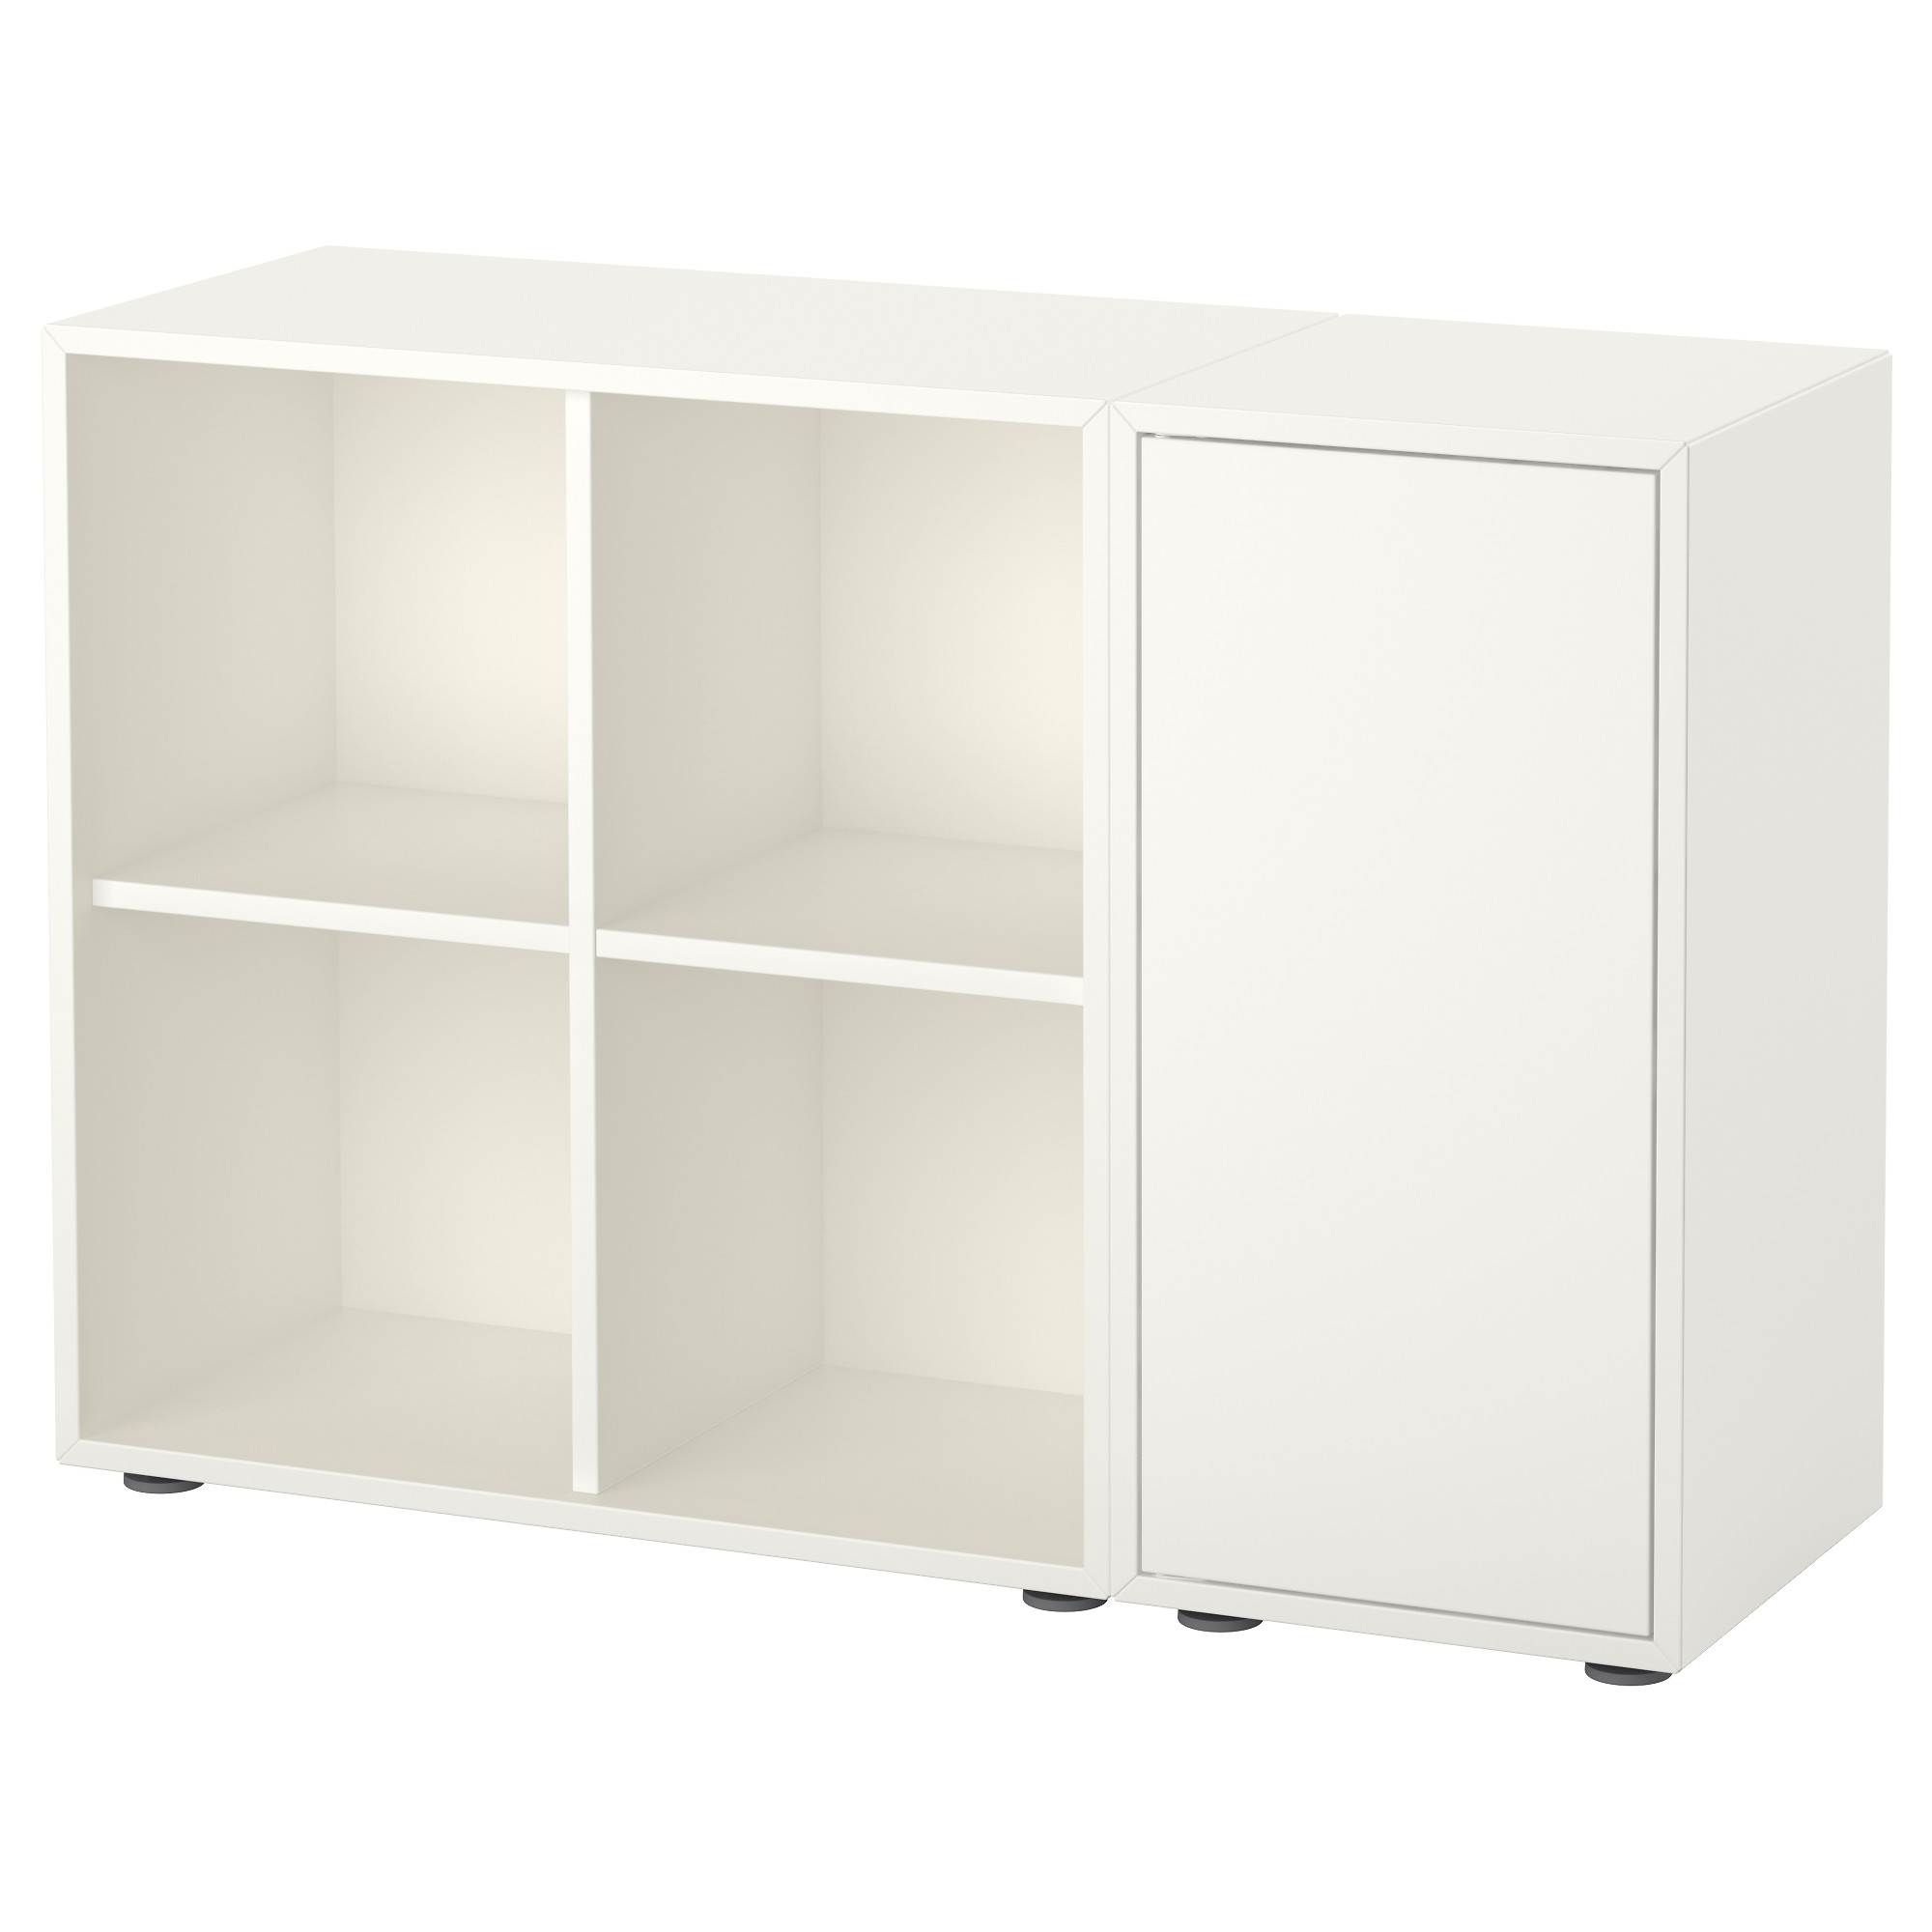 EKET cabinet combination with feet